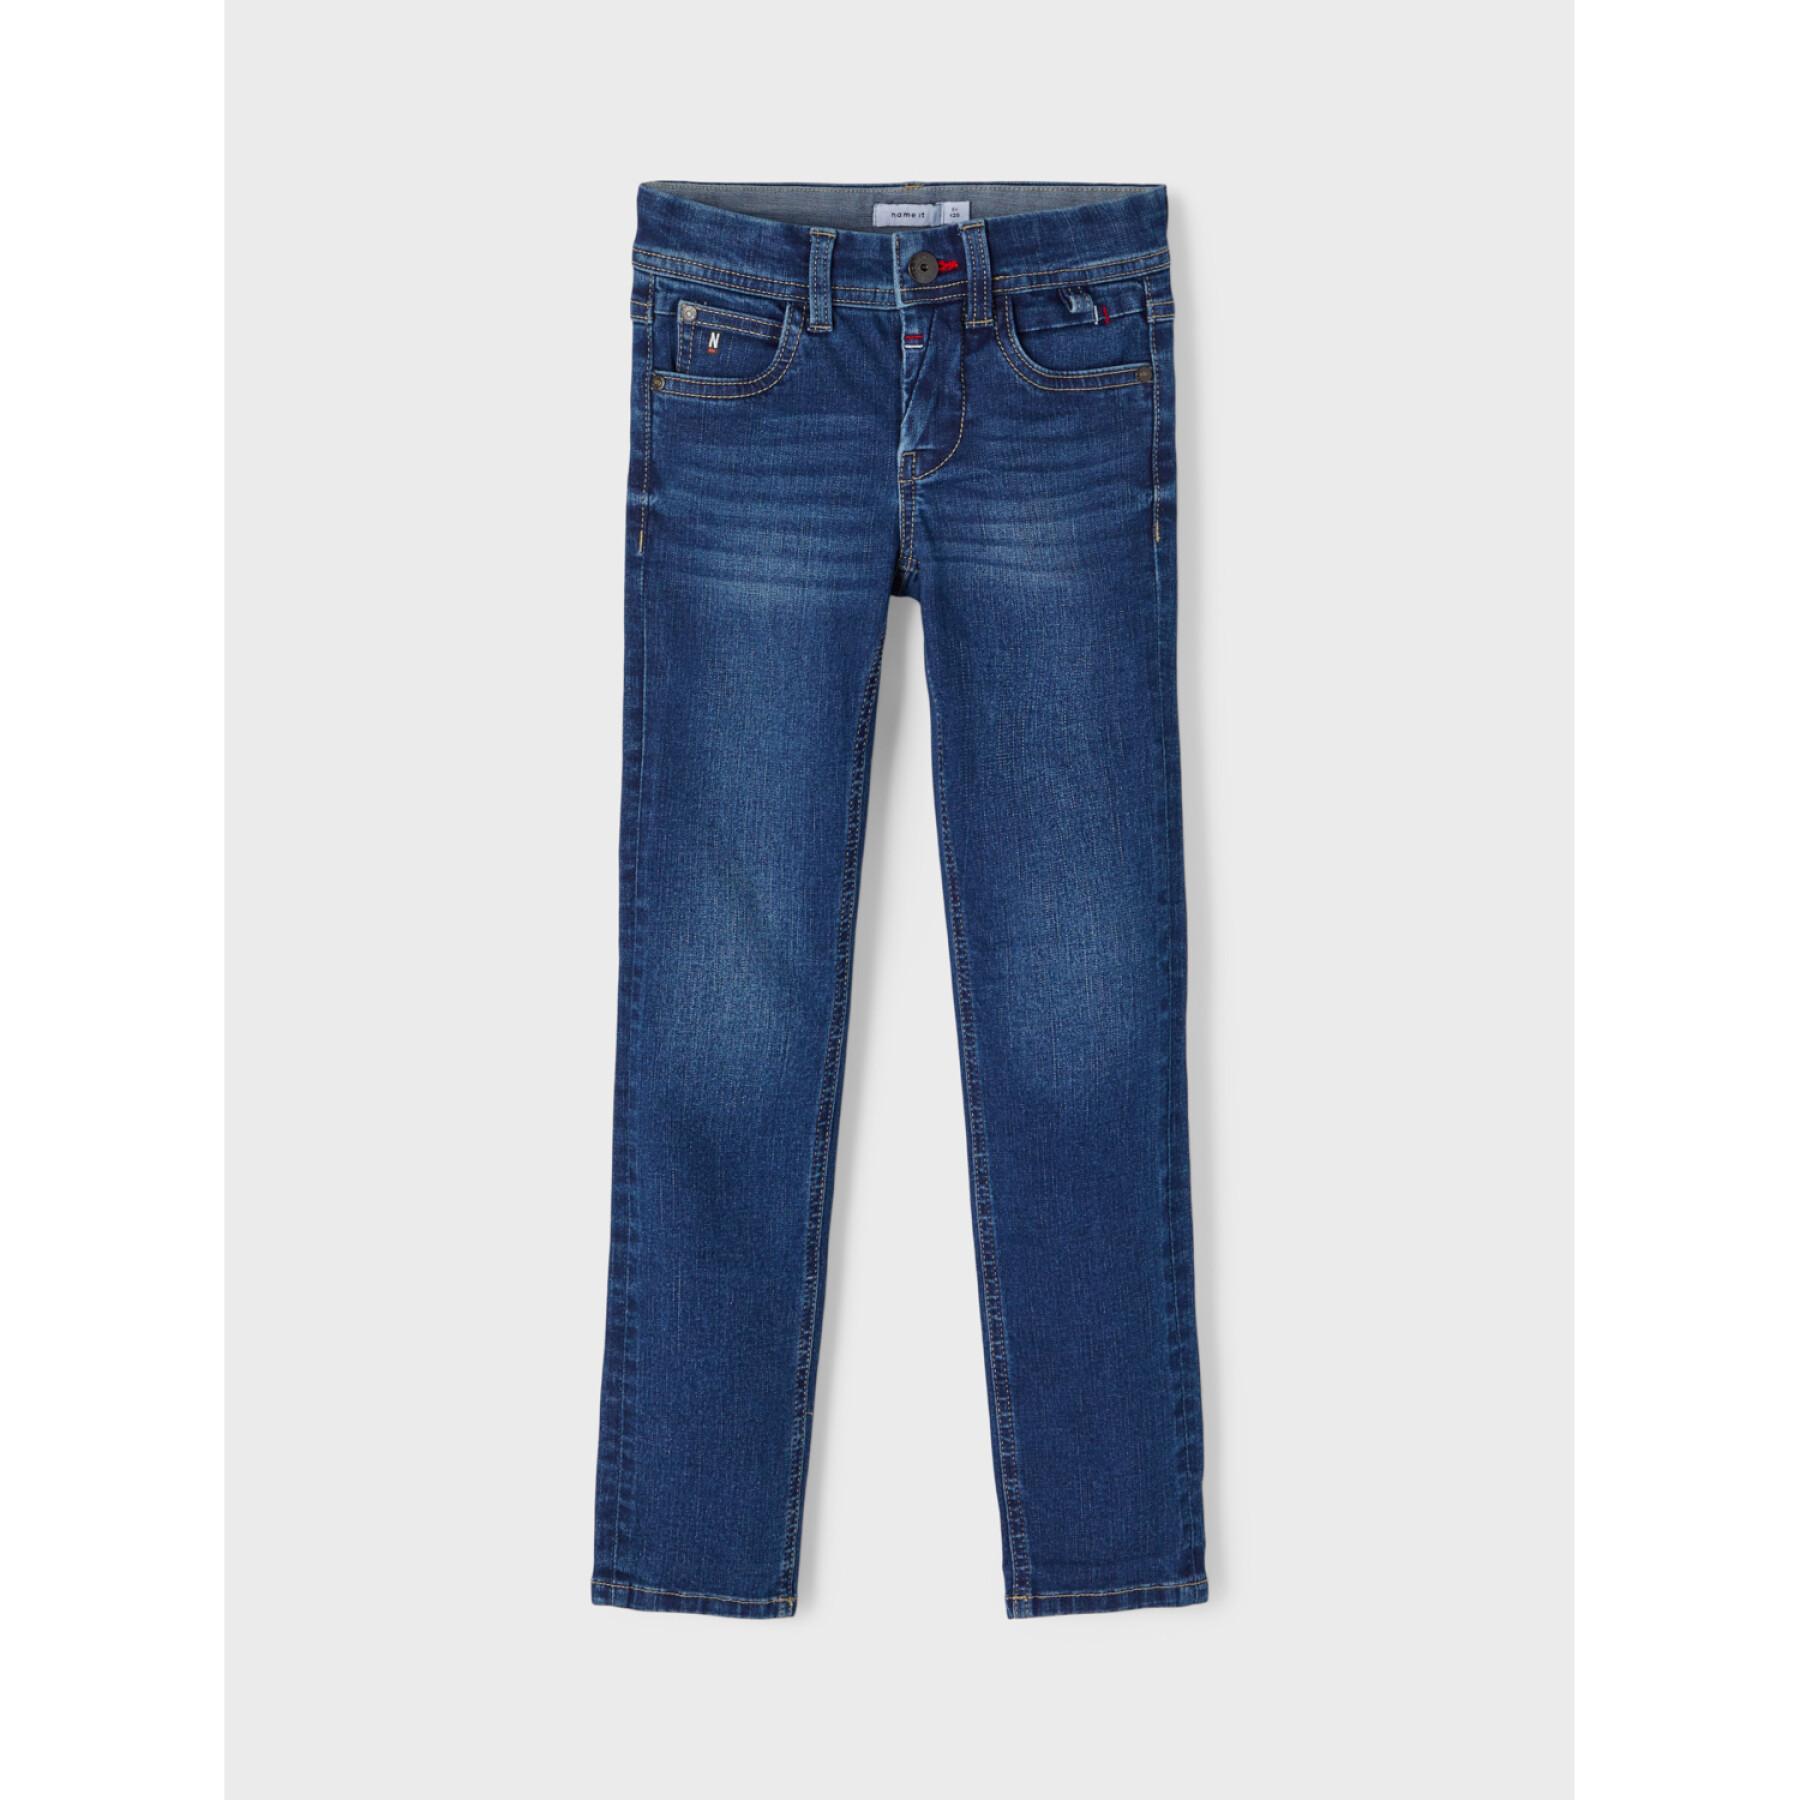 Children's jeans Name it Theo Taul 3618